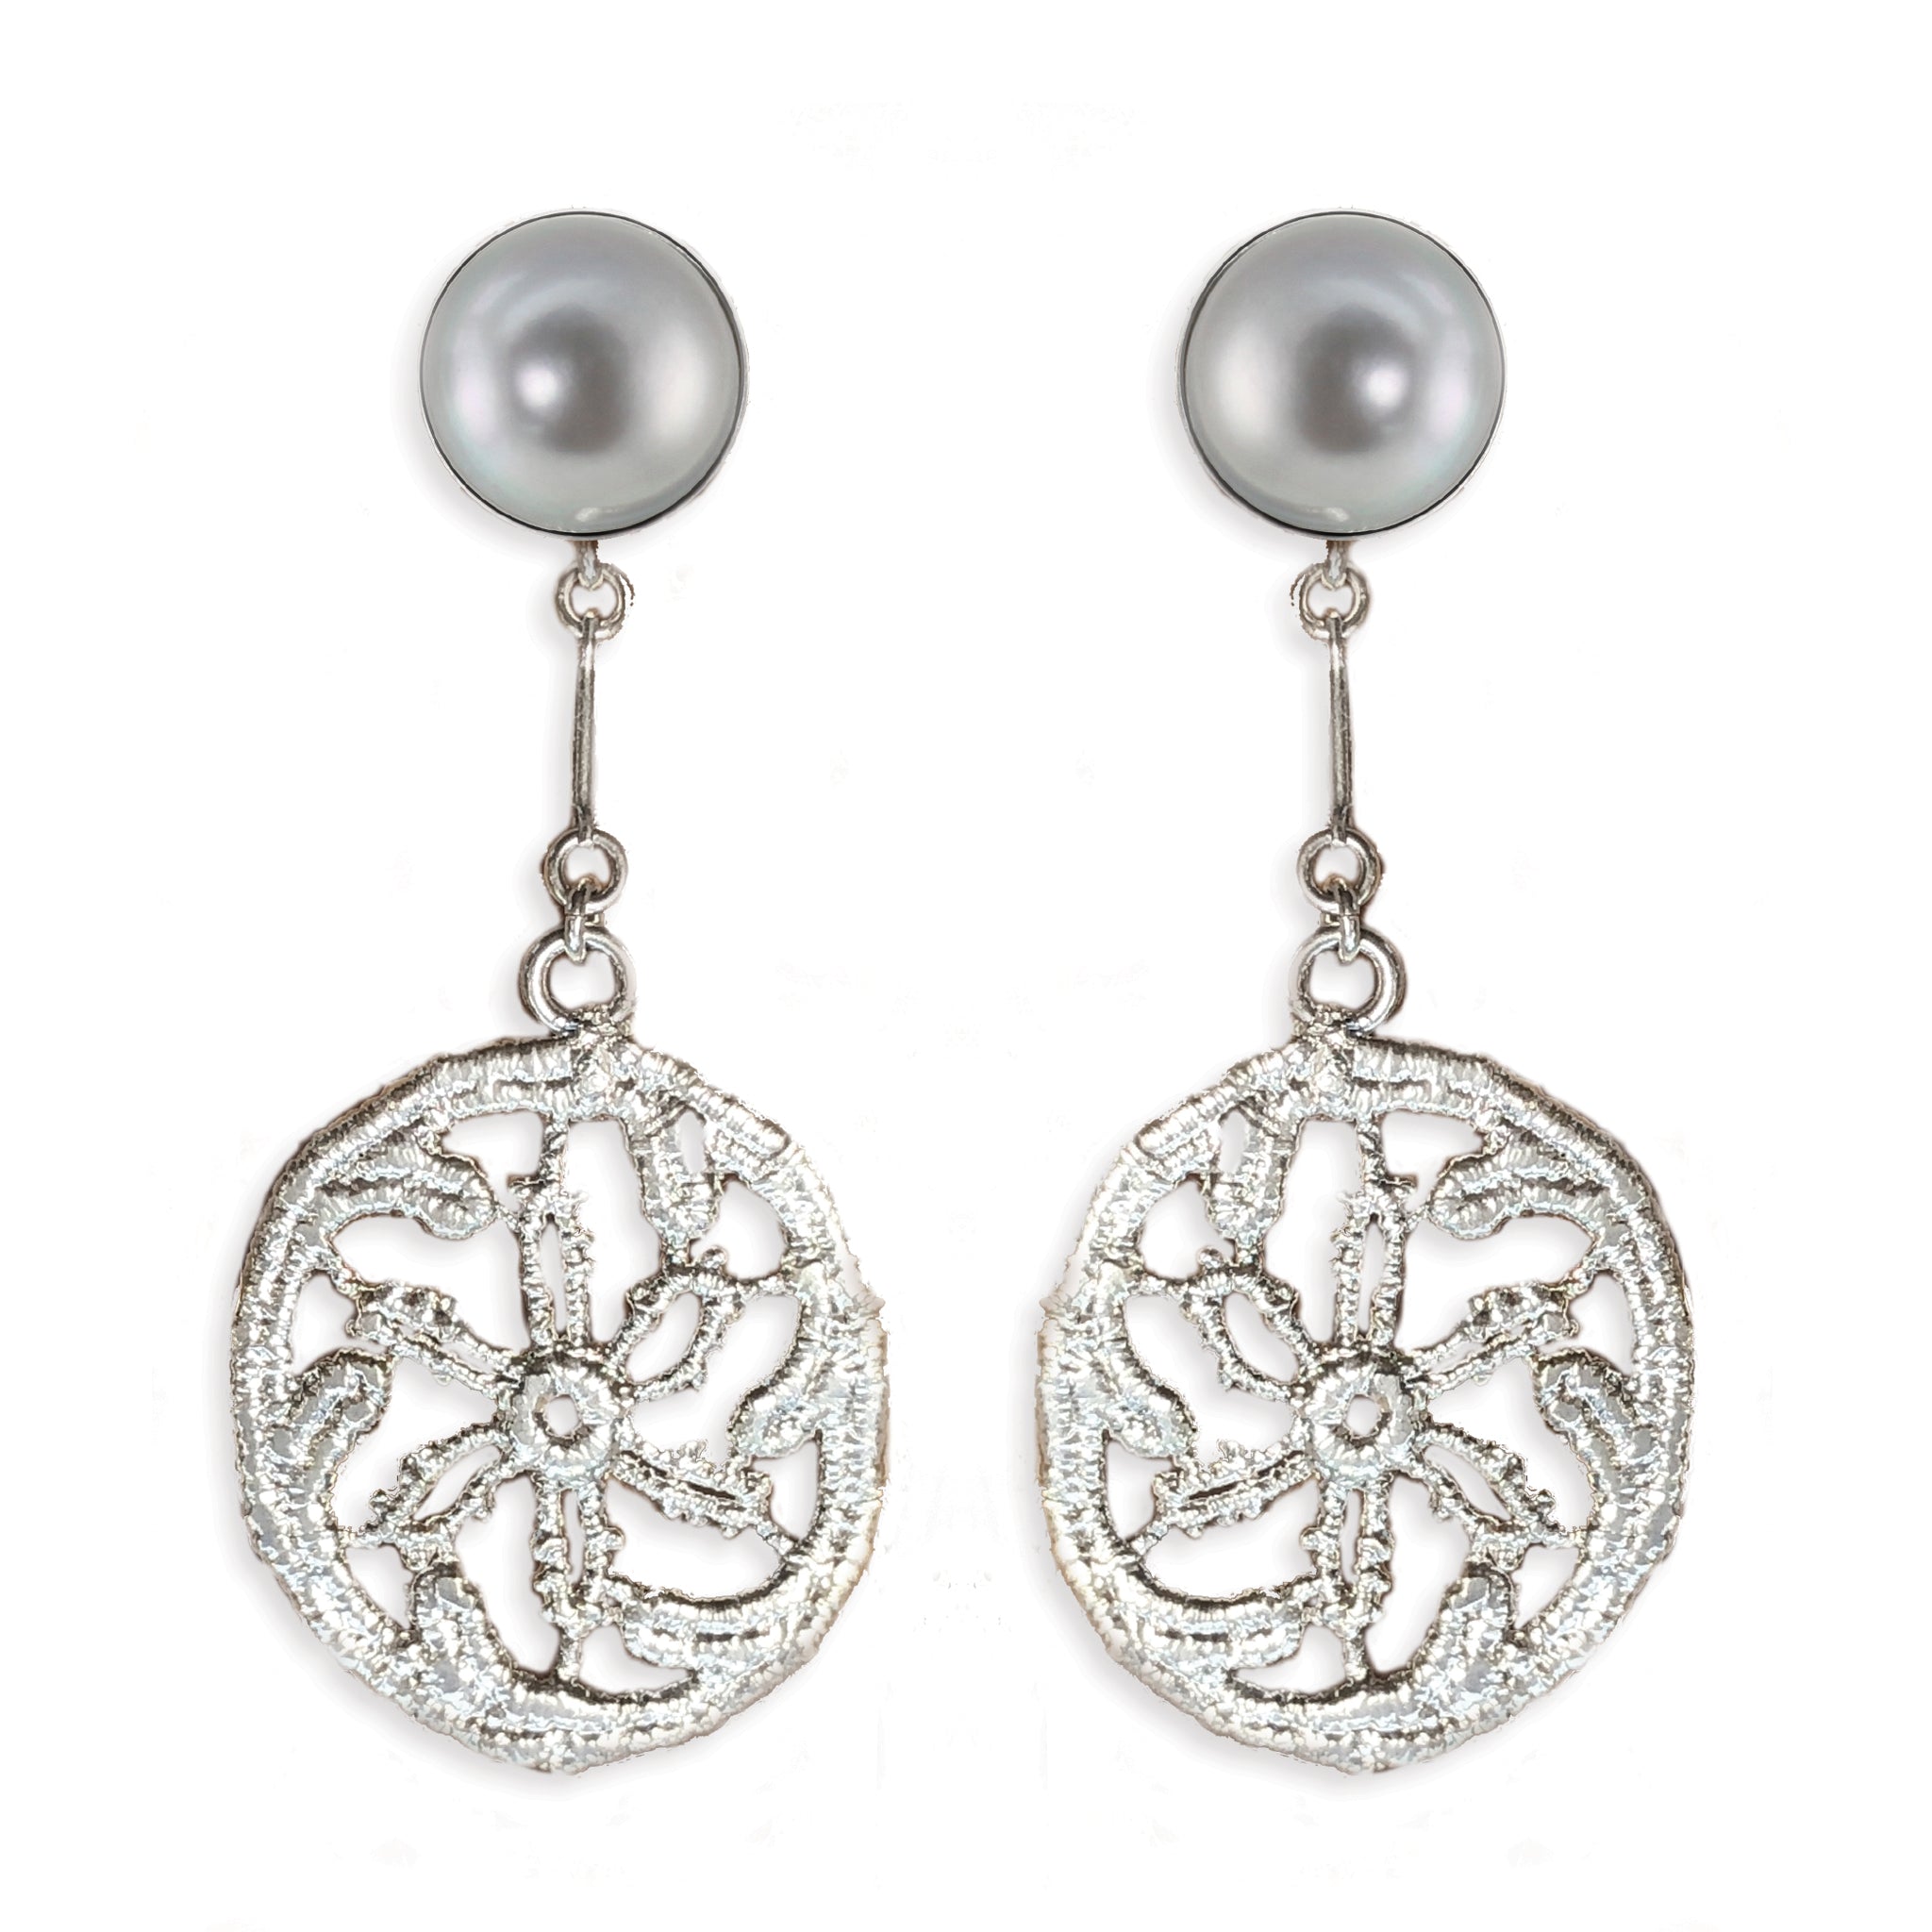 Luminous Silver Pearl Earrings with Lace Silver Pendant - Monika Knutsson